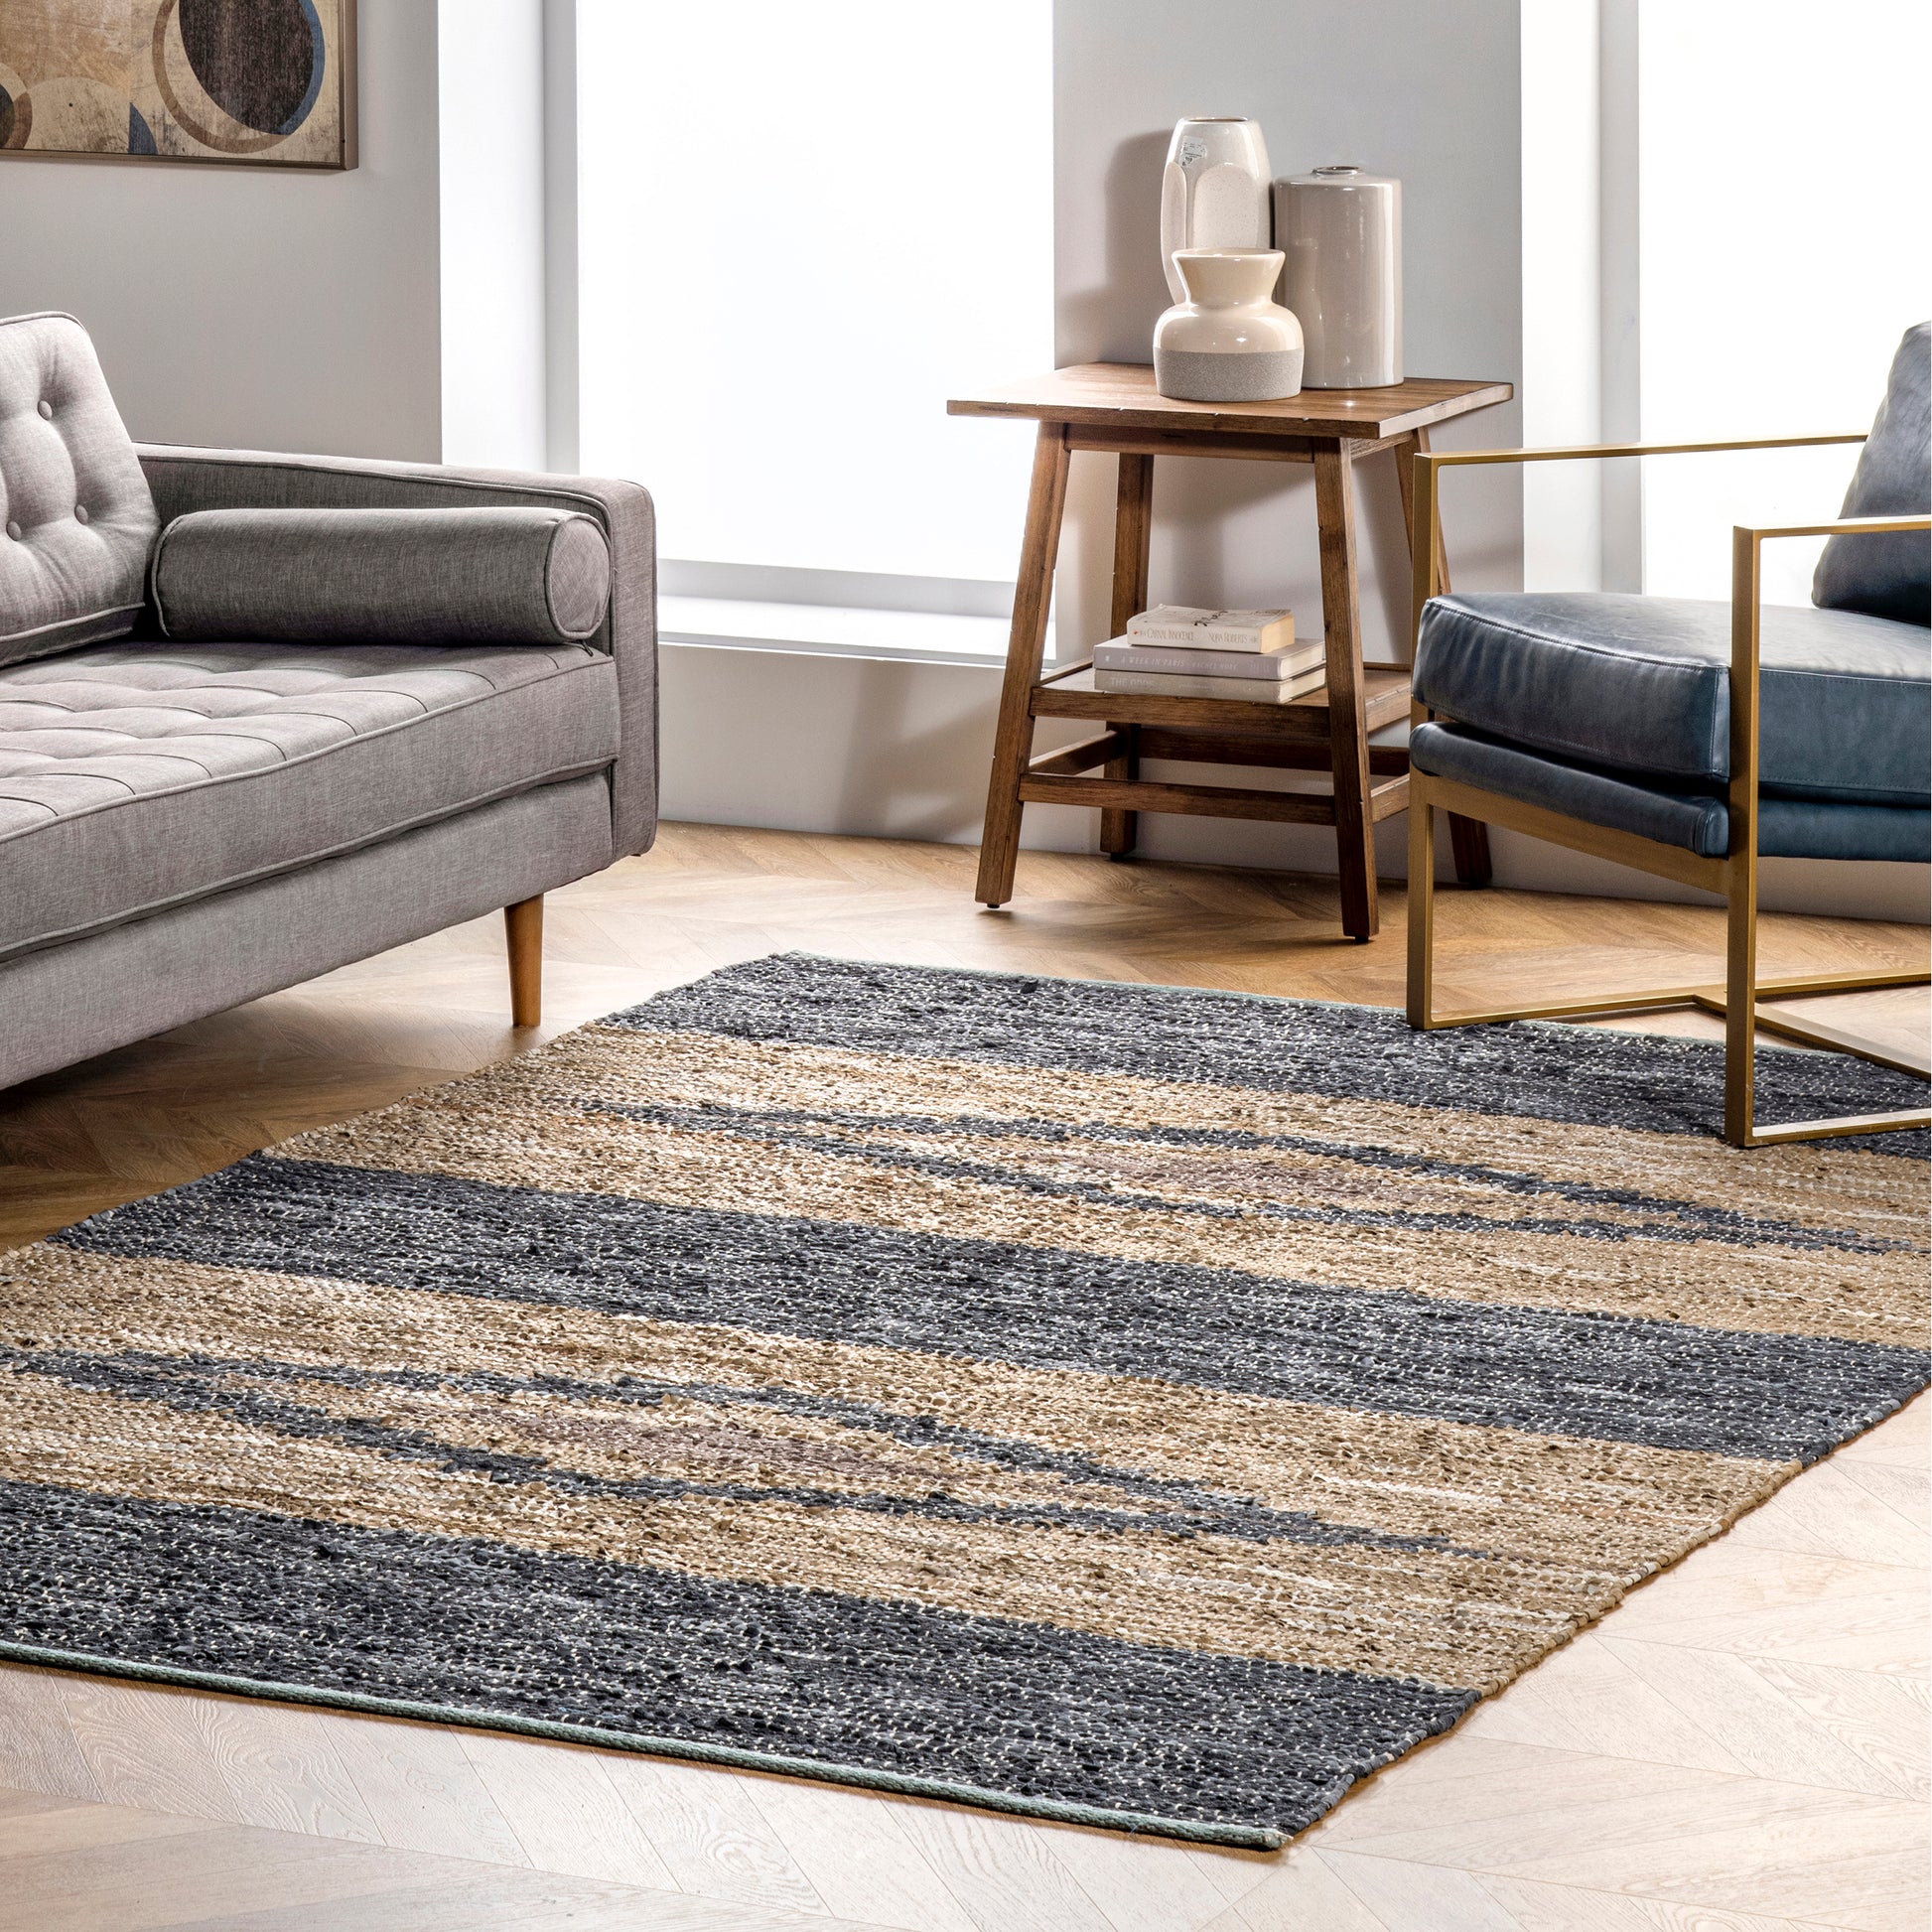 Nuloom Farren Leather Nfa1420A Gray Area Rug